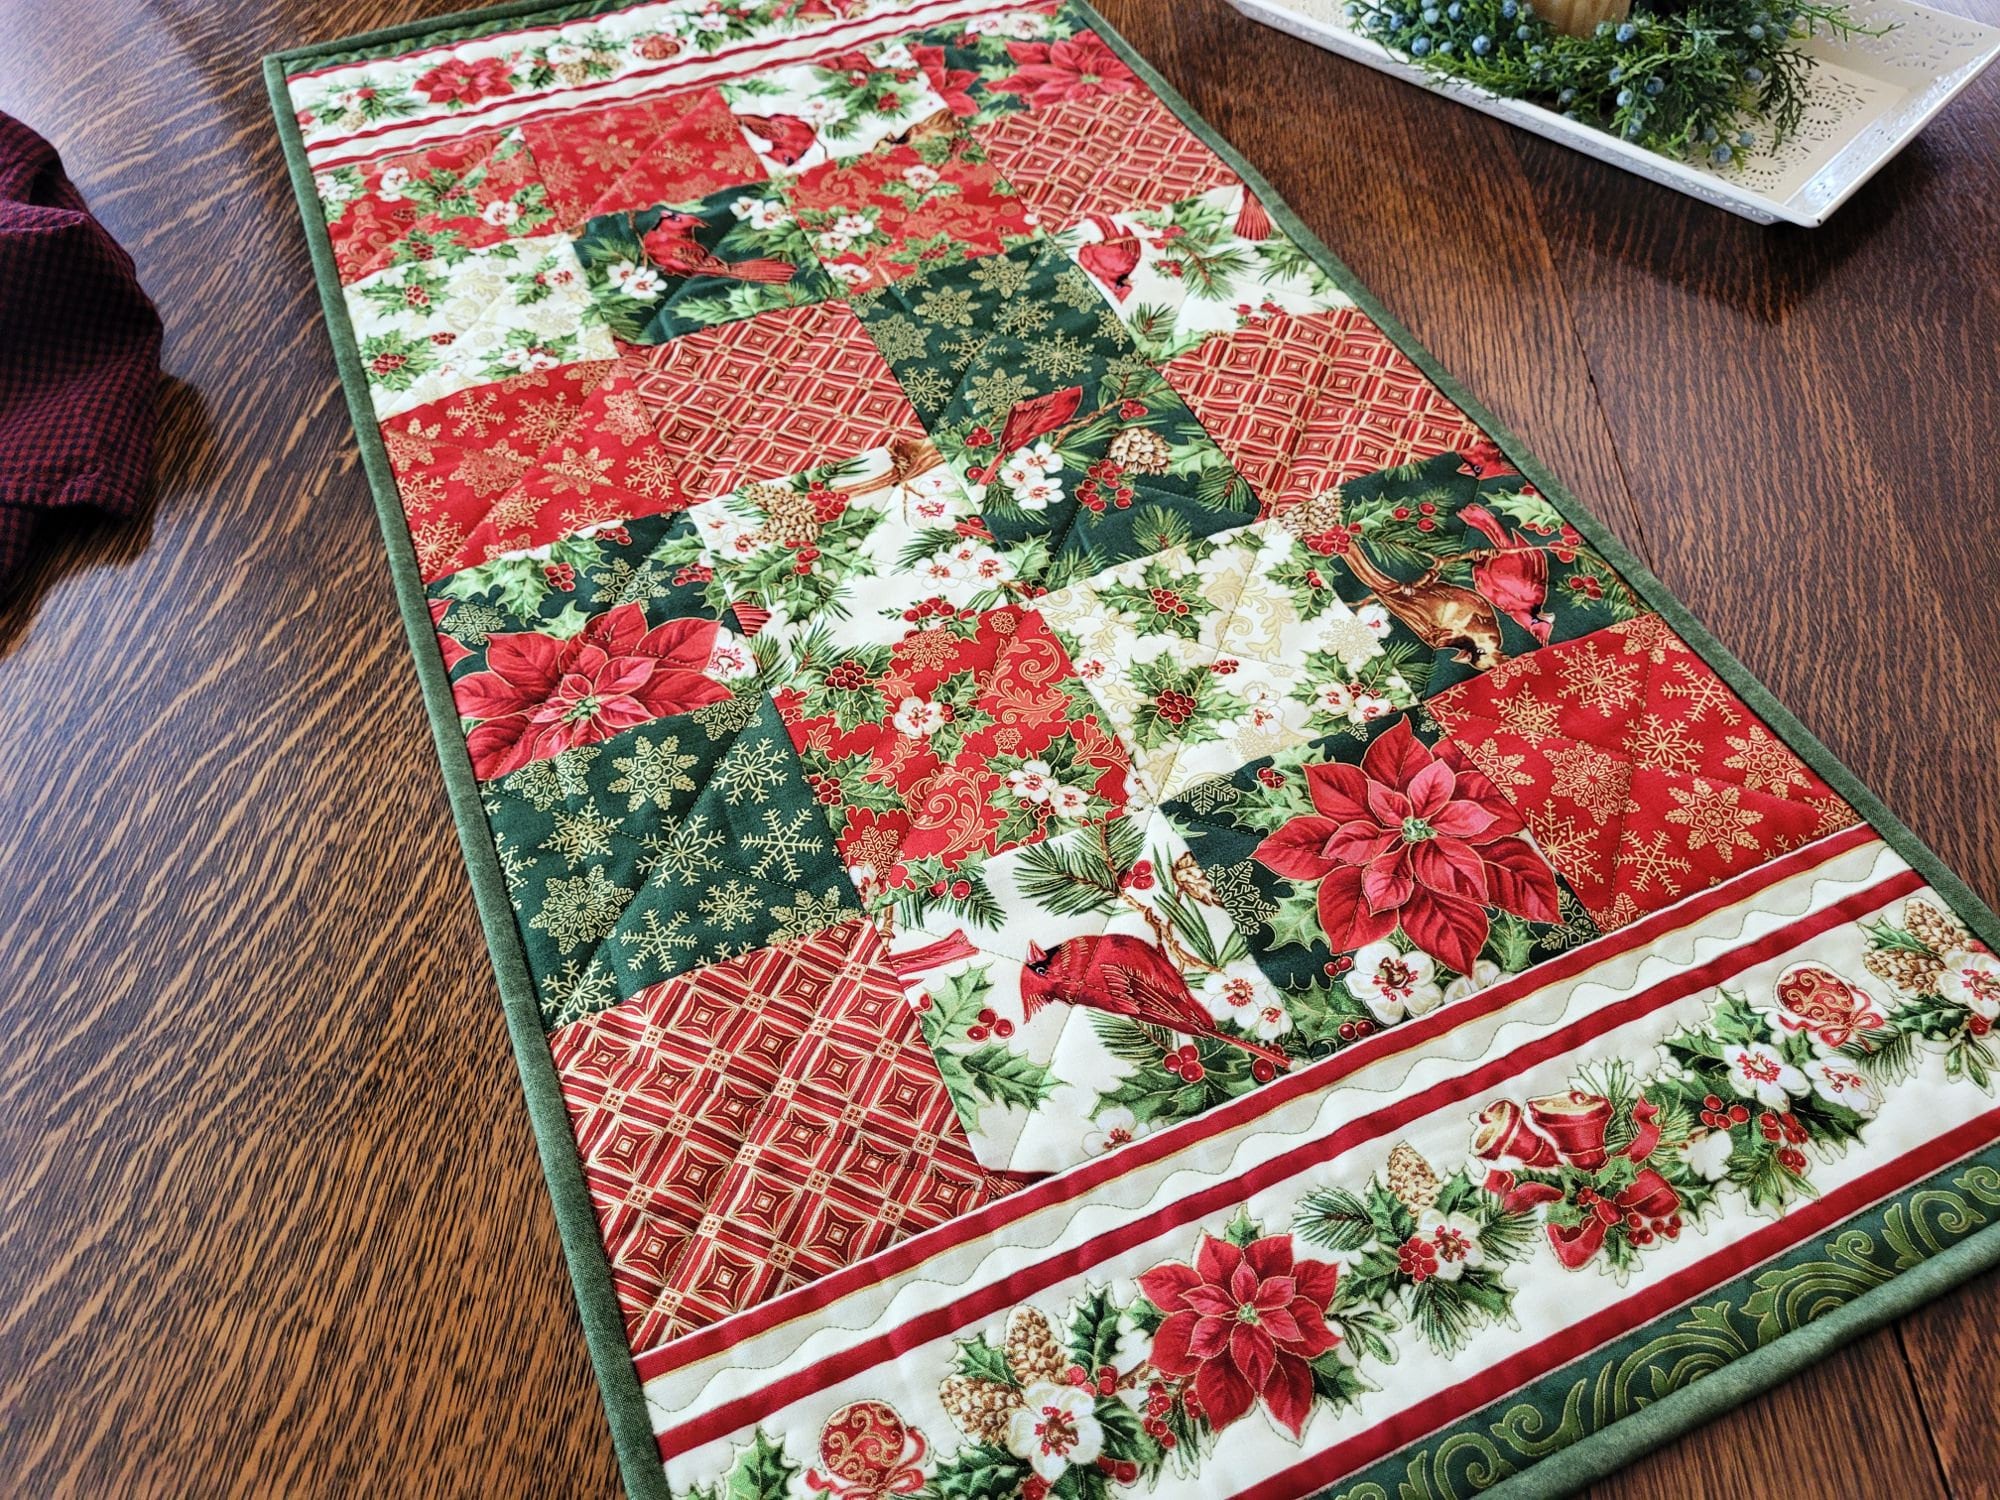 quilted holiday runner